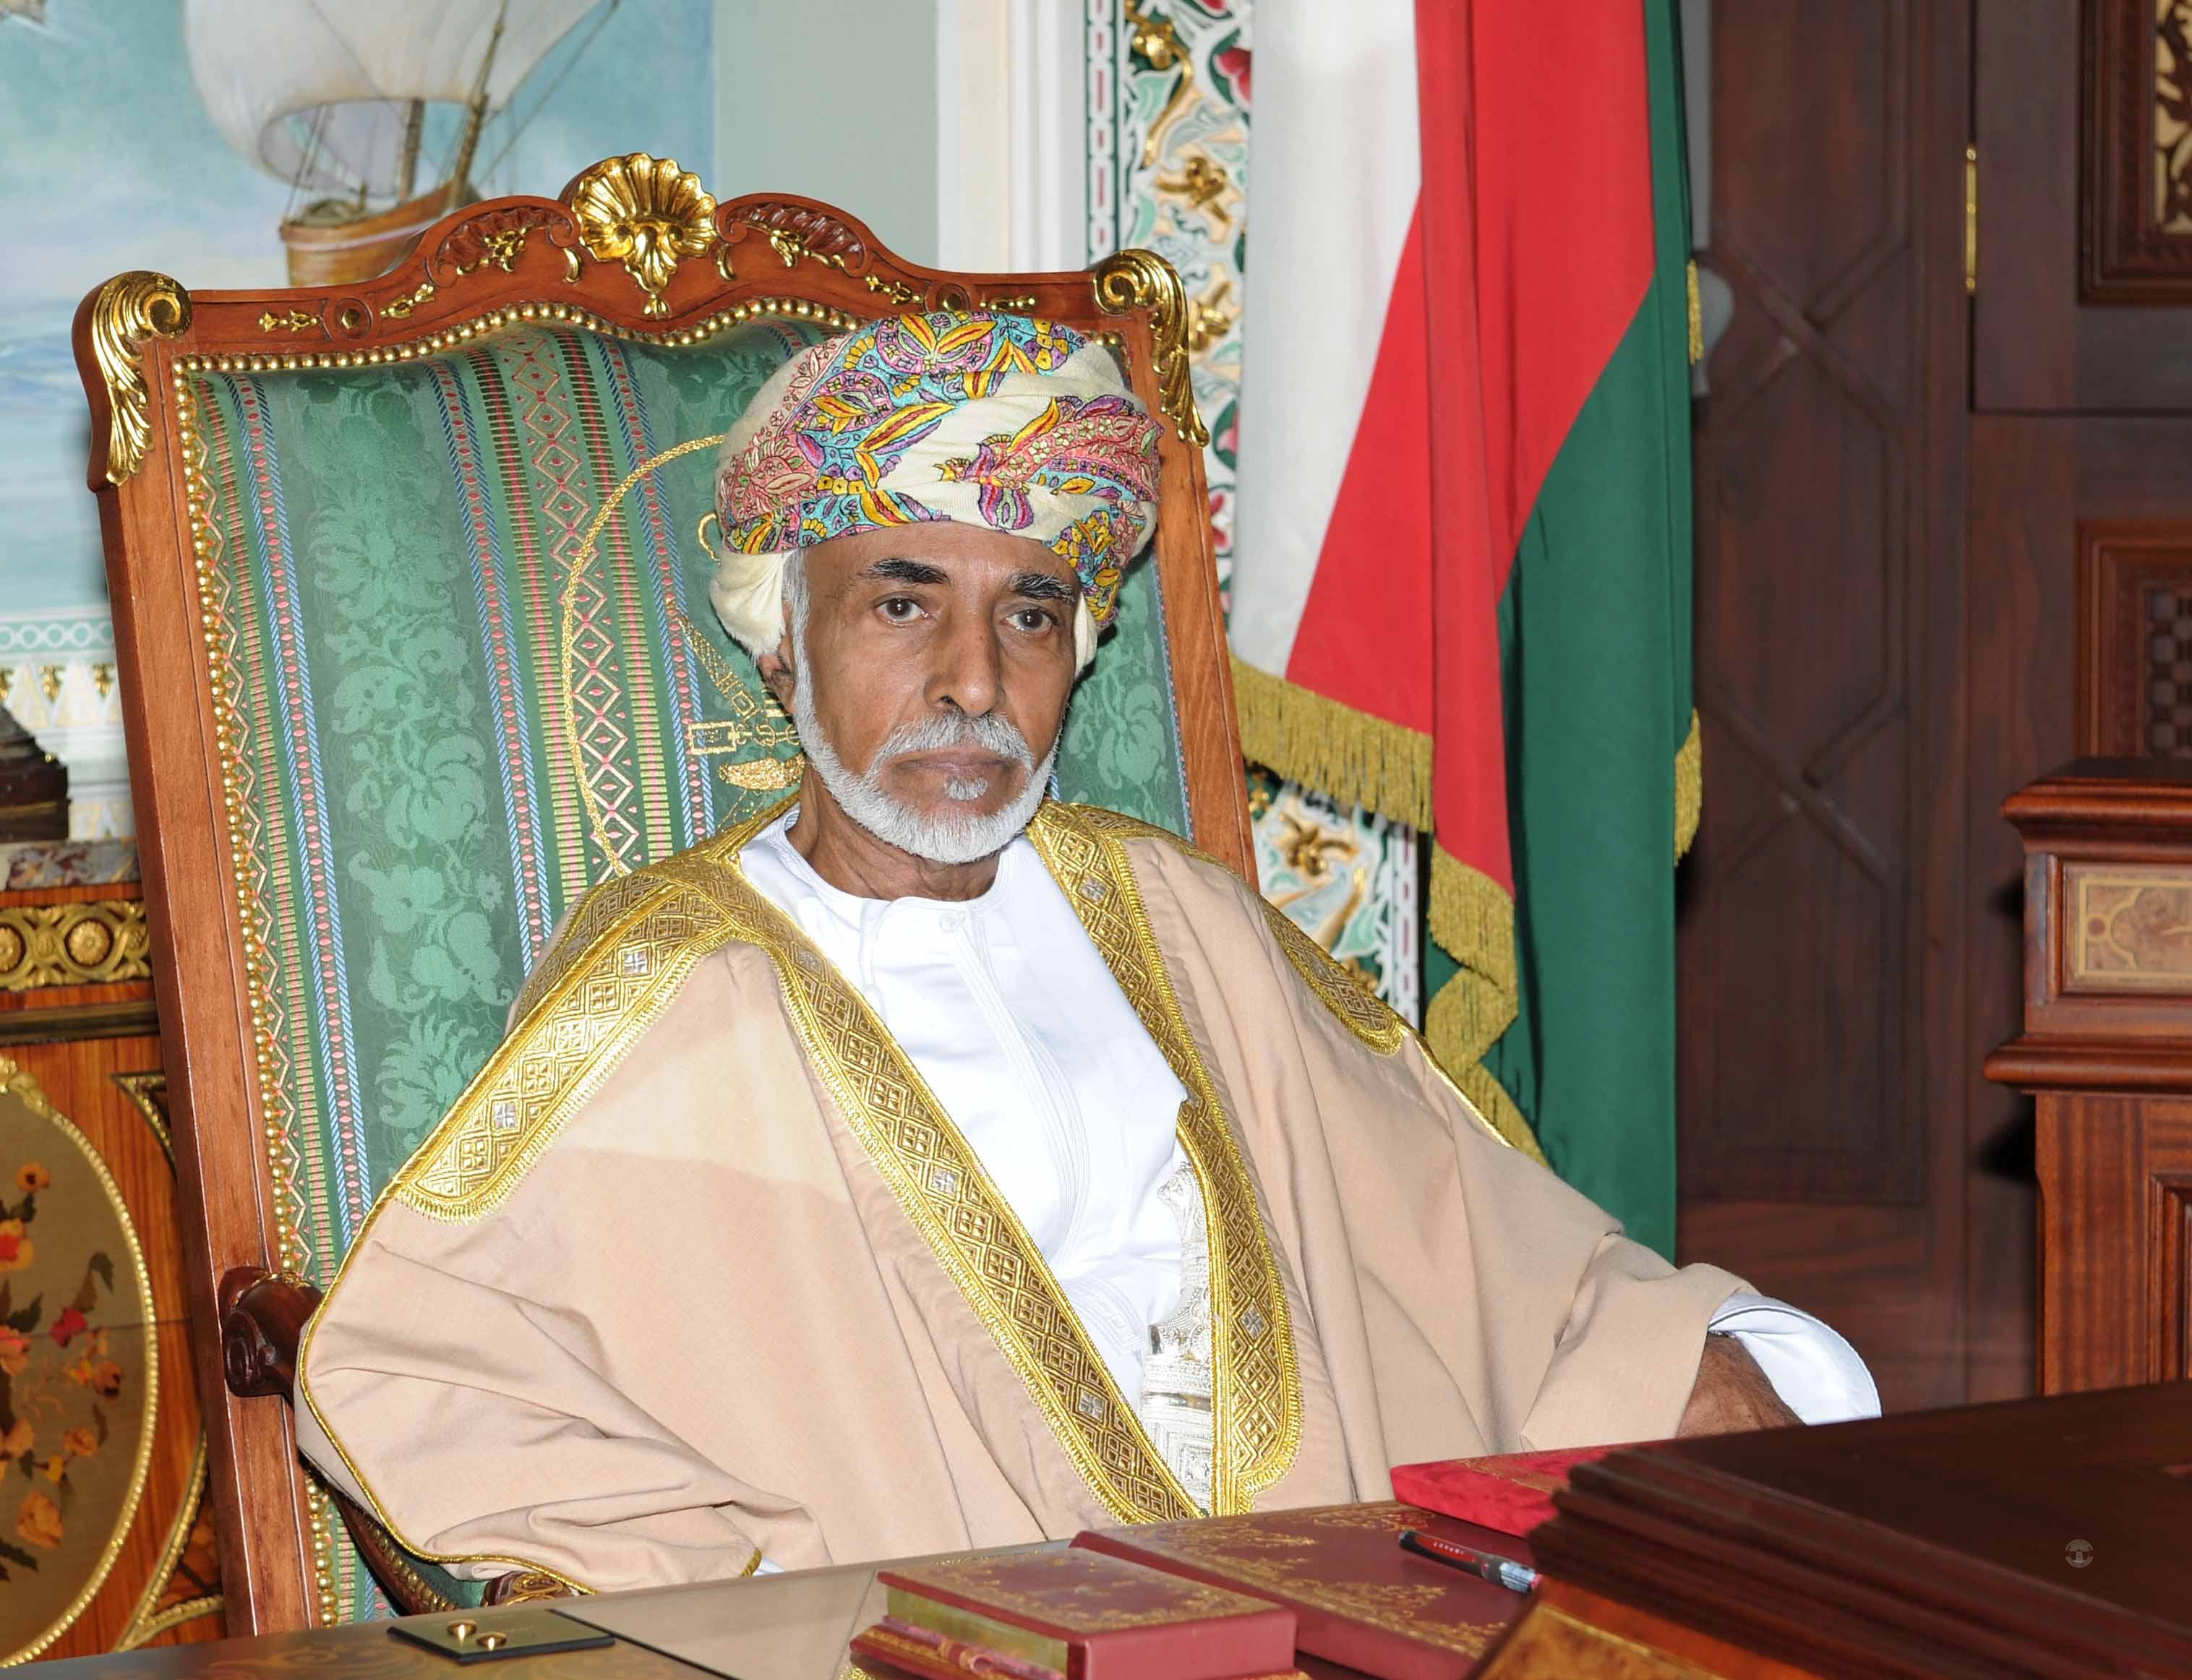 His Majesty Sultan Qaboos sends greetings to India, Republic of Korea